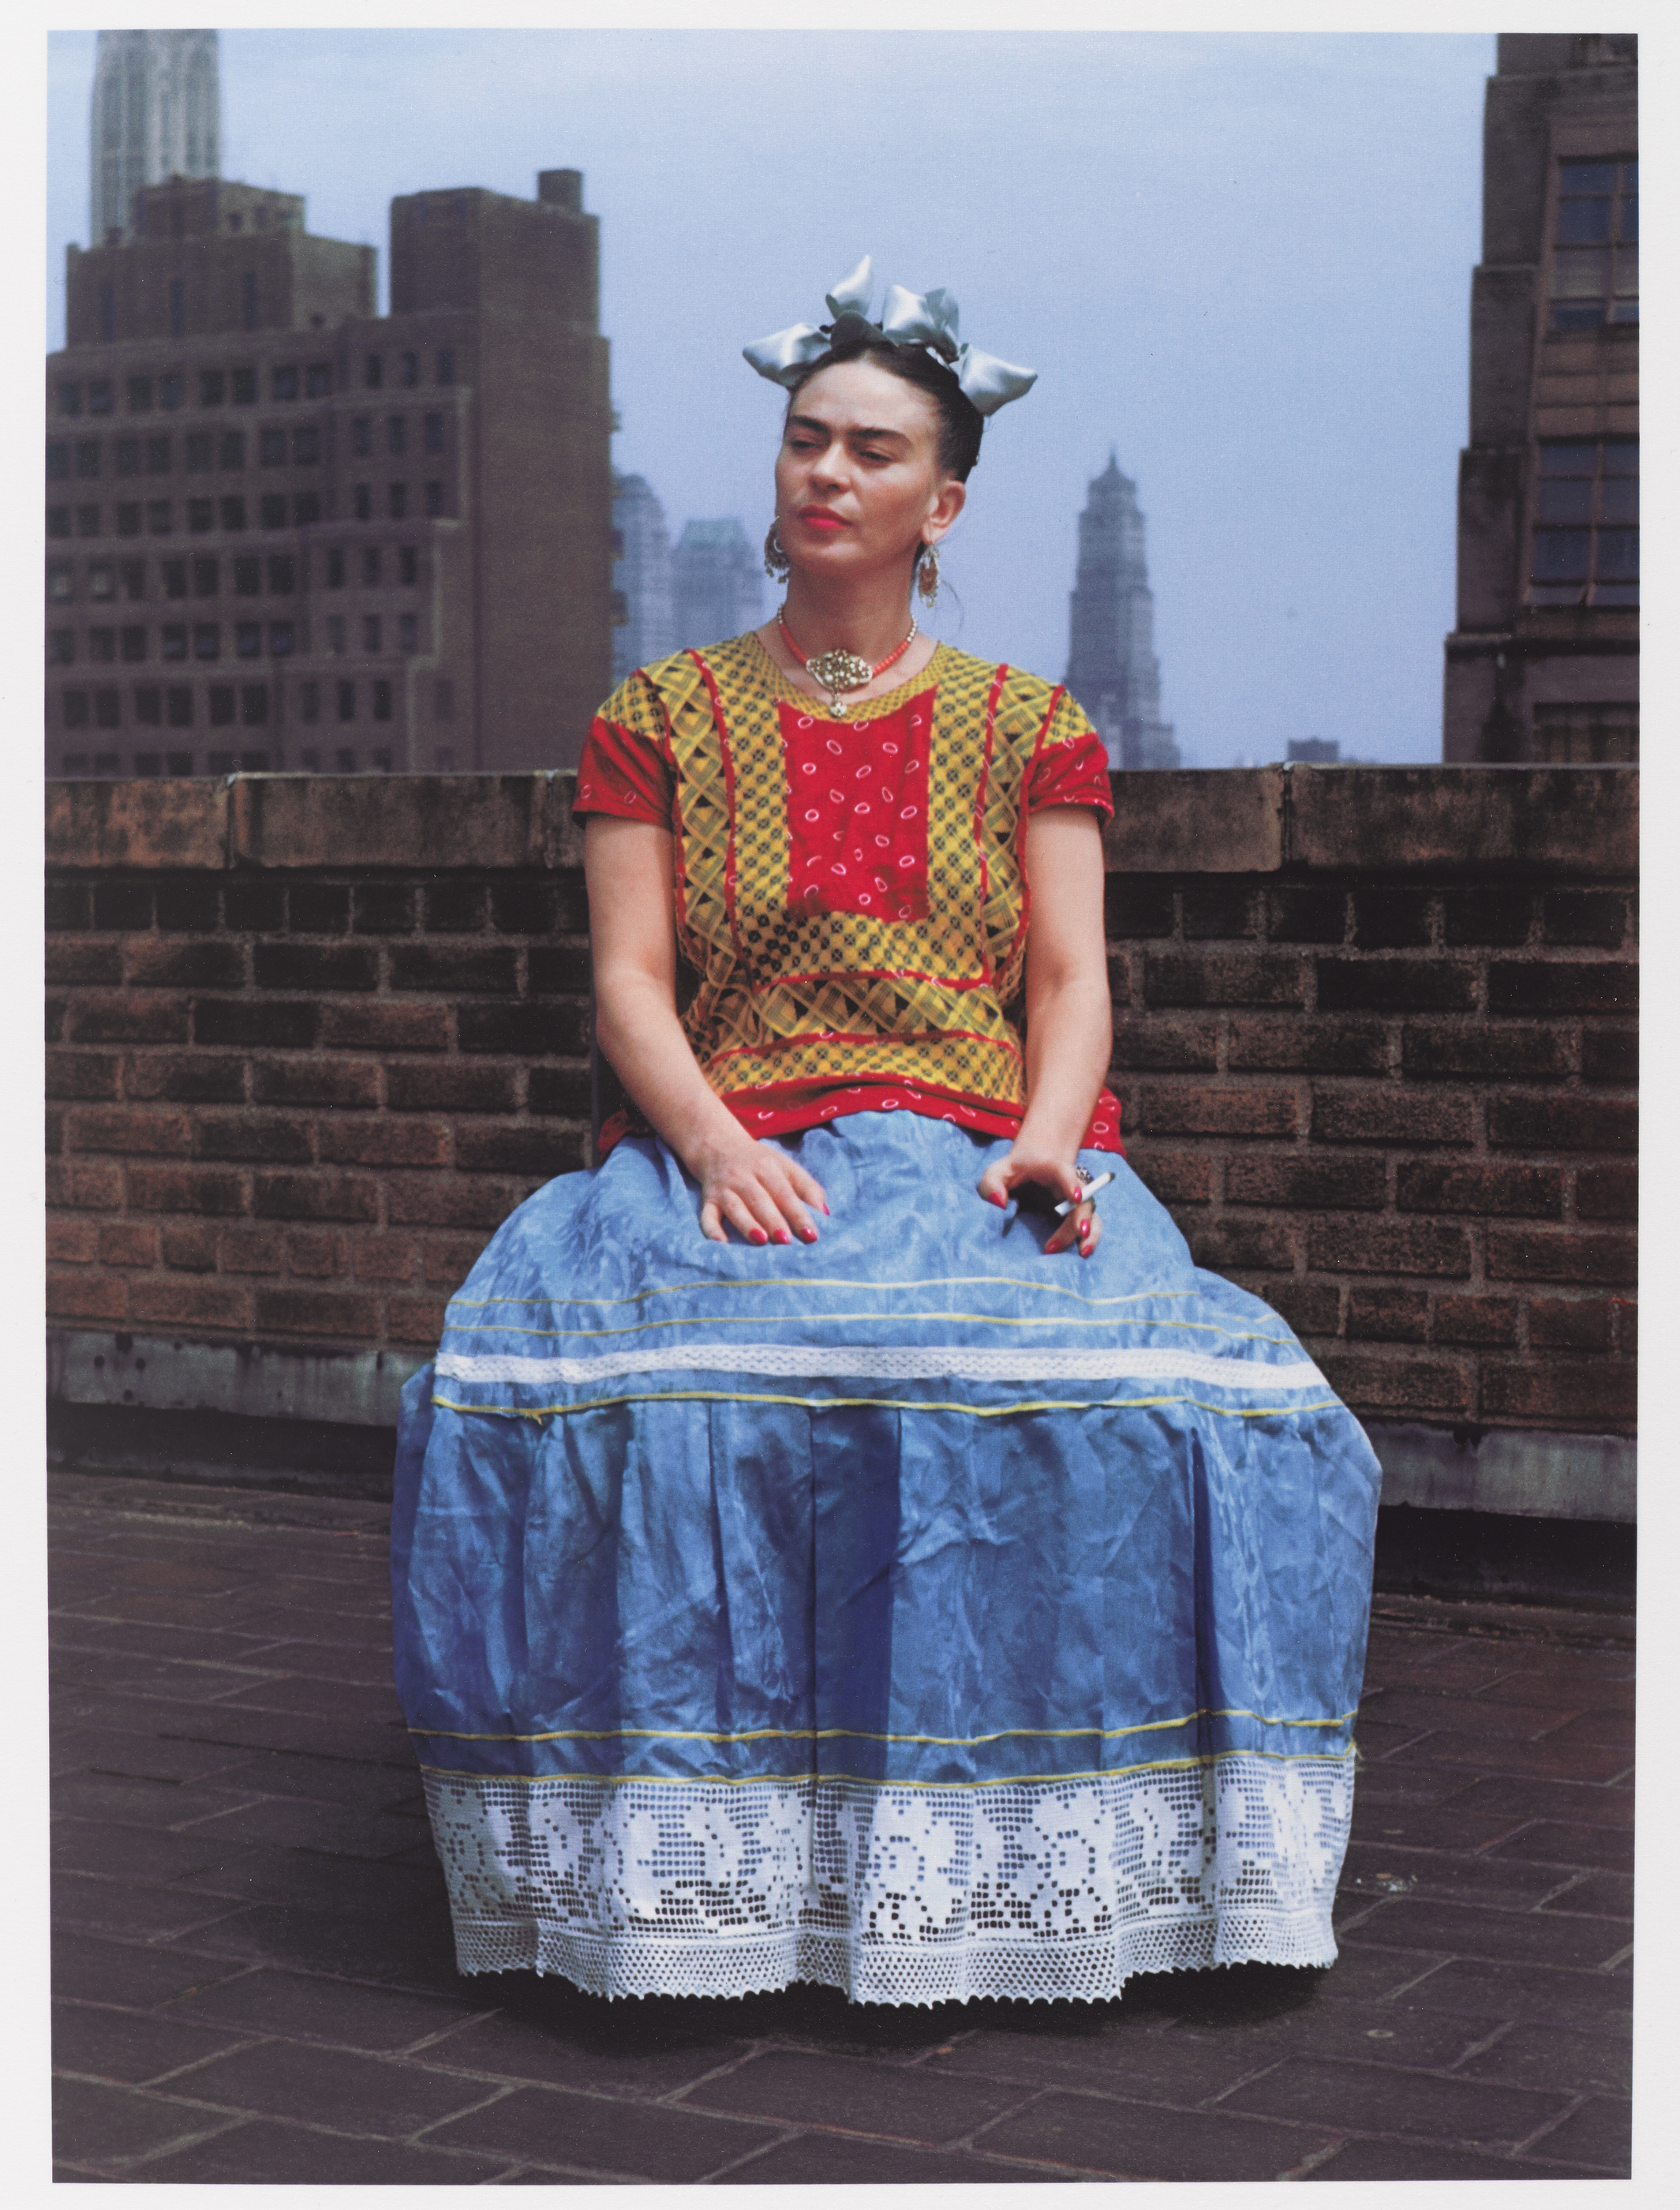 A photograph of Frida Kahlo taken in New York by Nickolas Muray. (Photo by Nickolas Muray, © Nickolas Muray Photo Archive.)